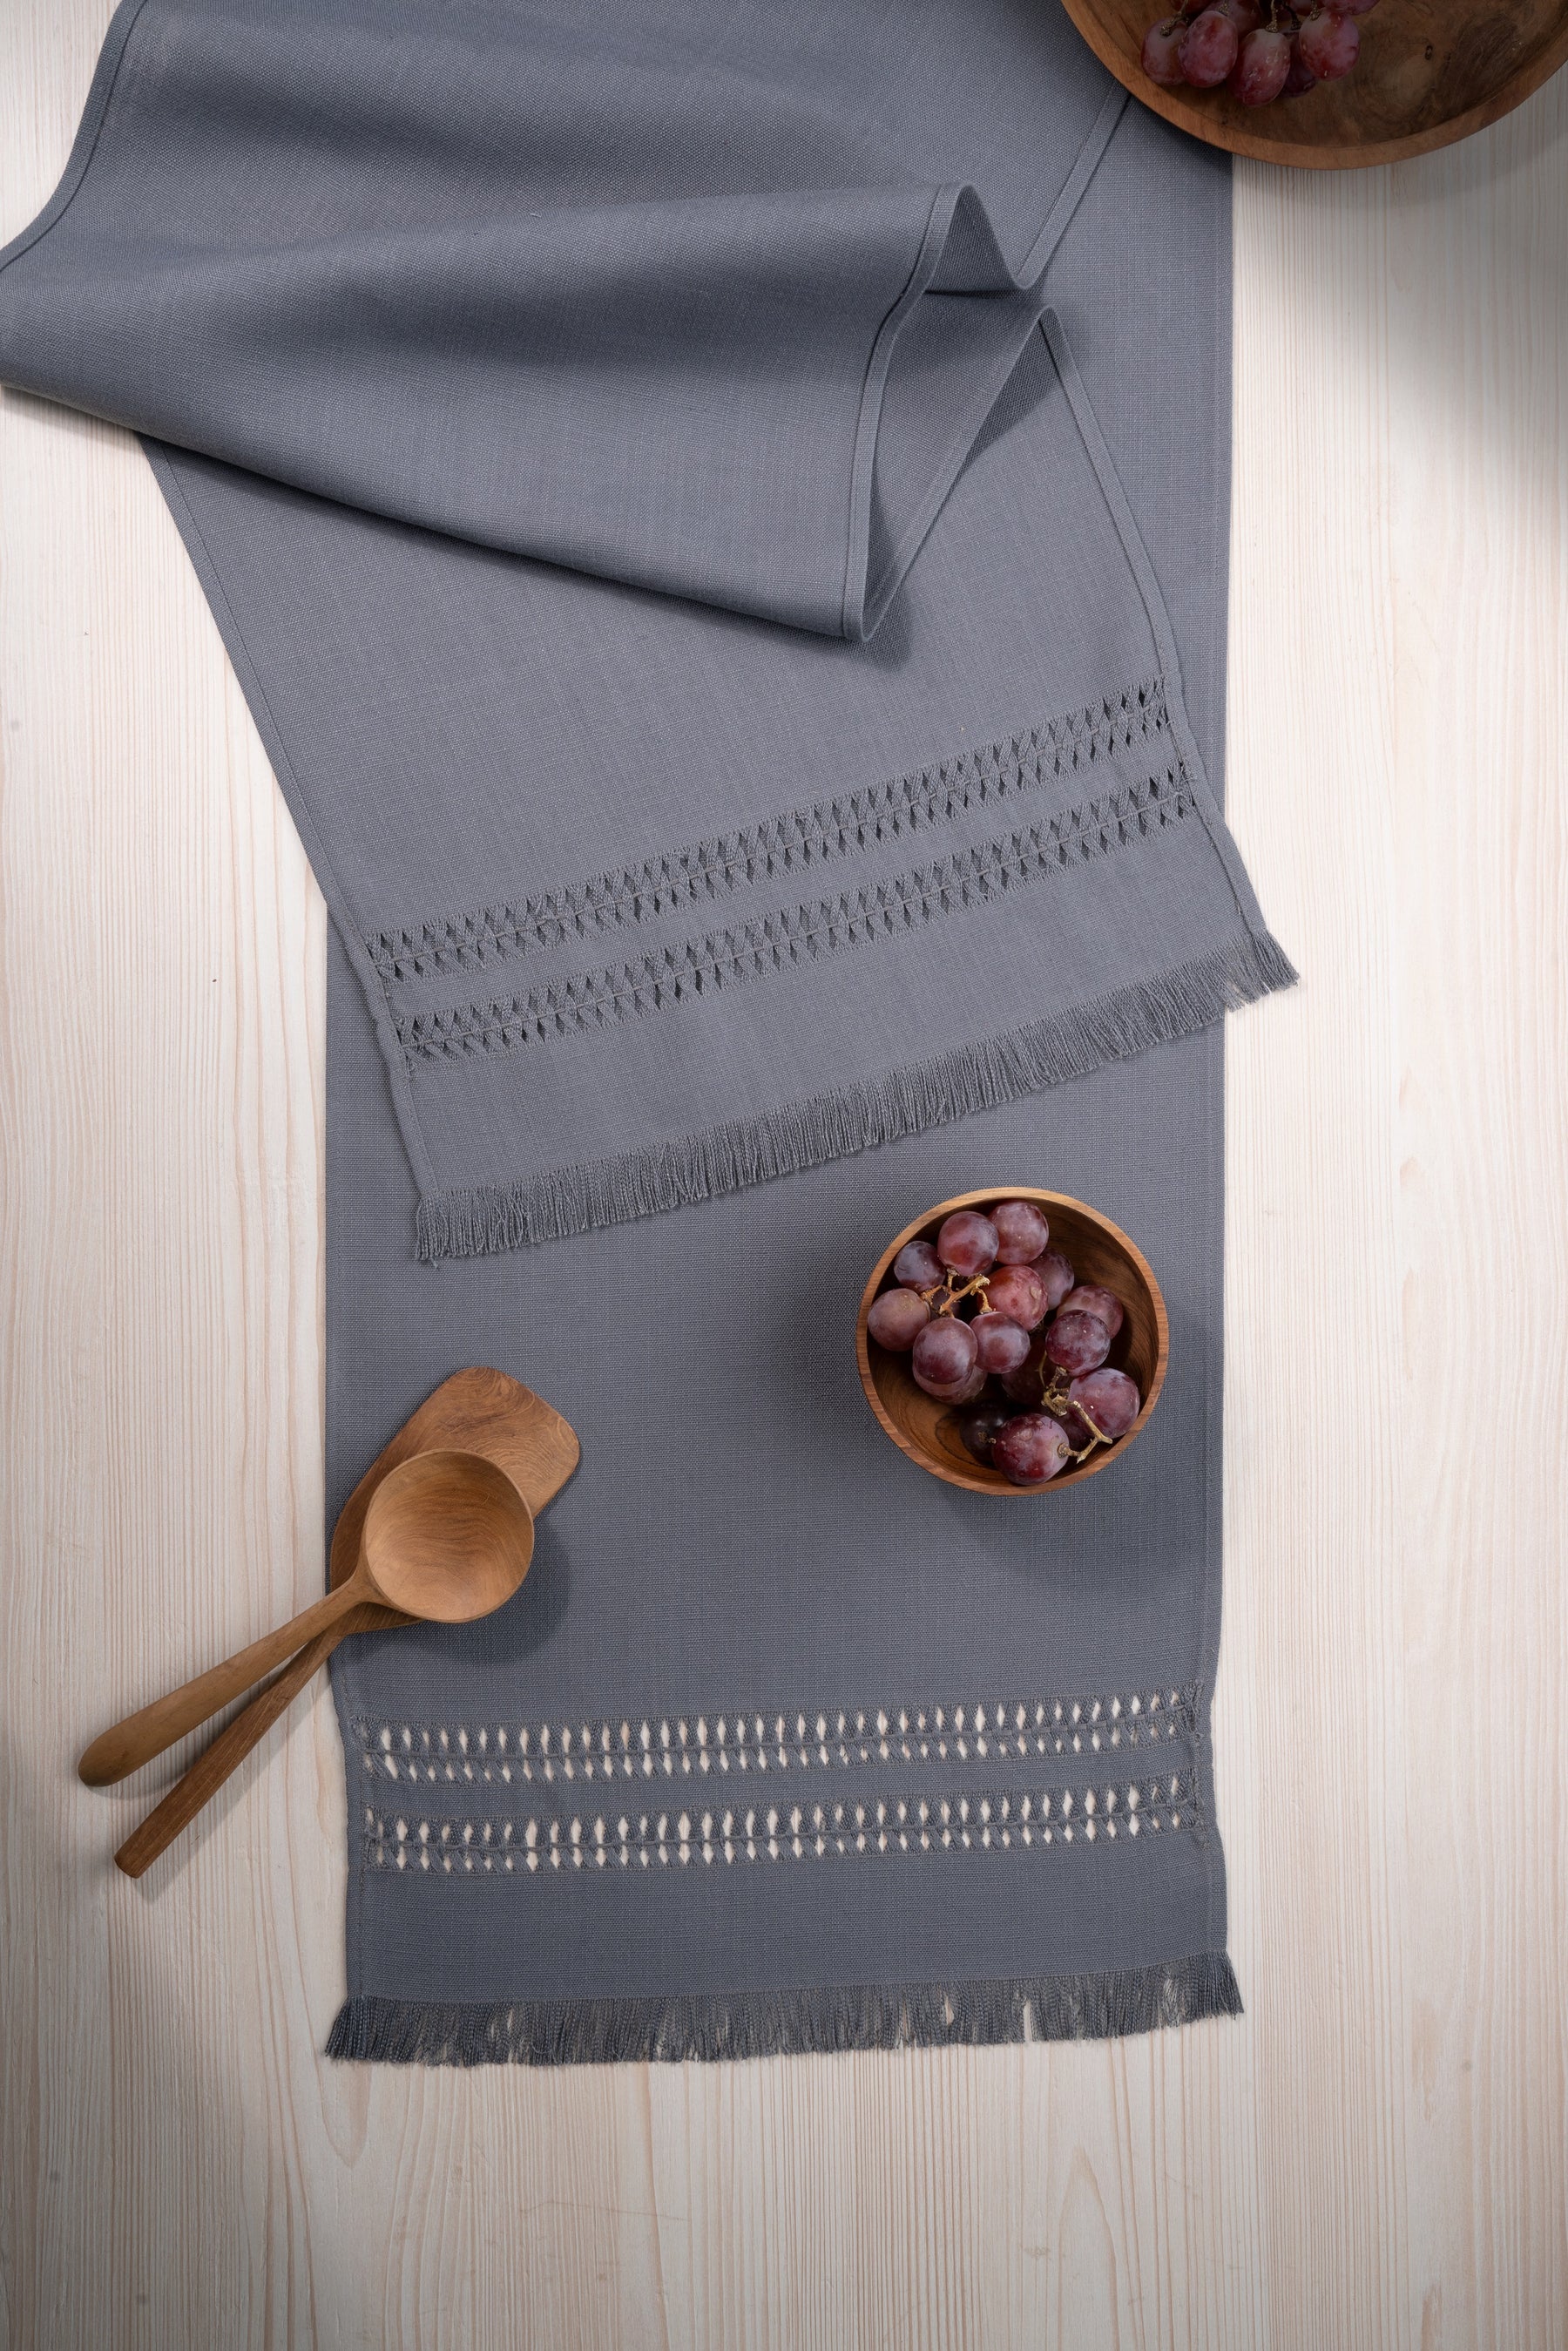 Charcoal Grey Textured Table Runner - Hand Hemstitch